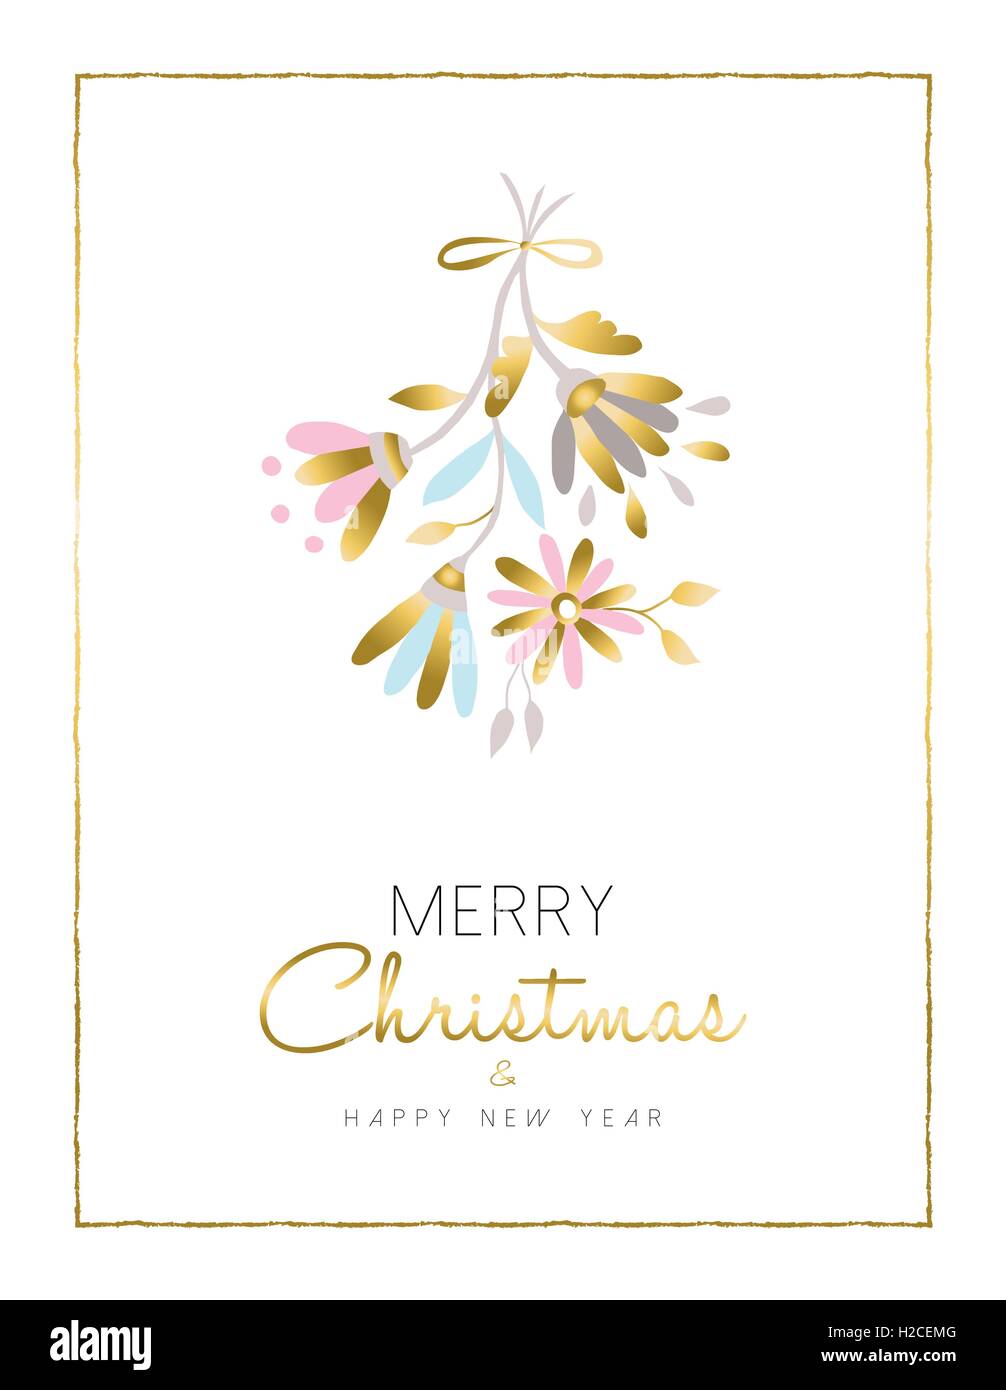 Merry Christmas and happy new year gold flower decoration as christmas mistletoe, floral design for season card. EPS10 vector. Stock Vector